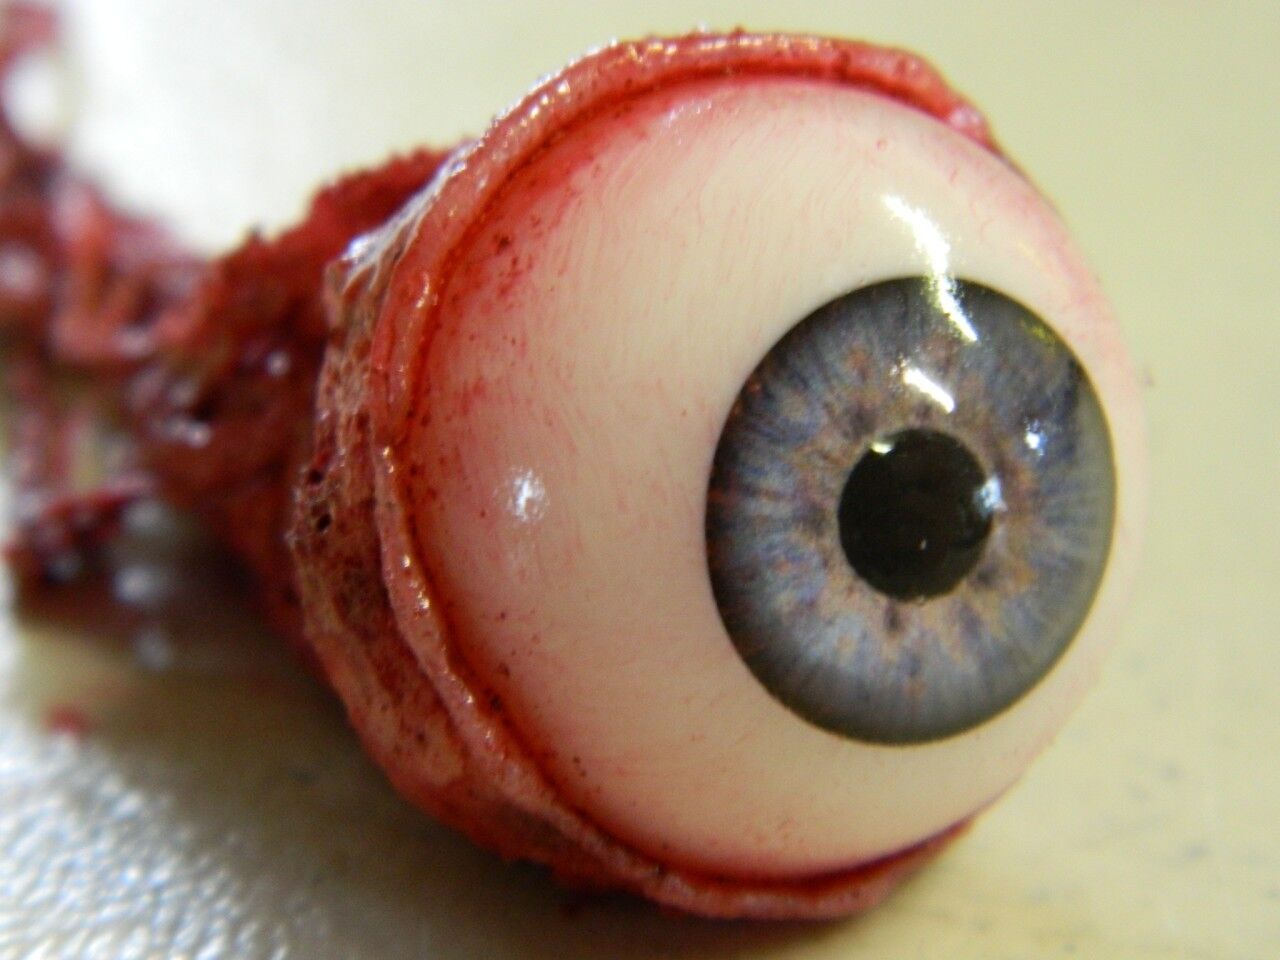 HALLOWEEN HORROR Movie PROP RIPPED OUT EYEBALL Blue by Dead Head Props